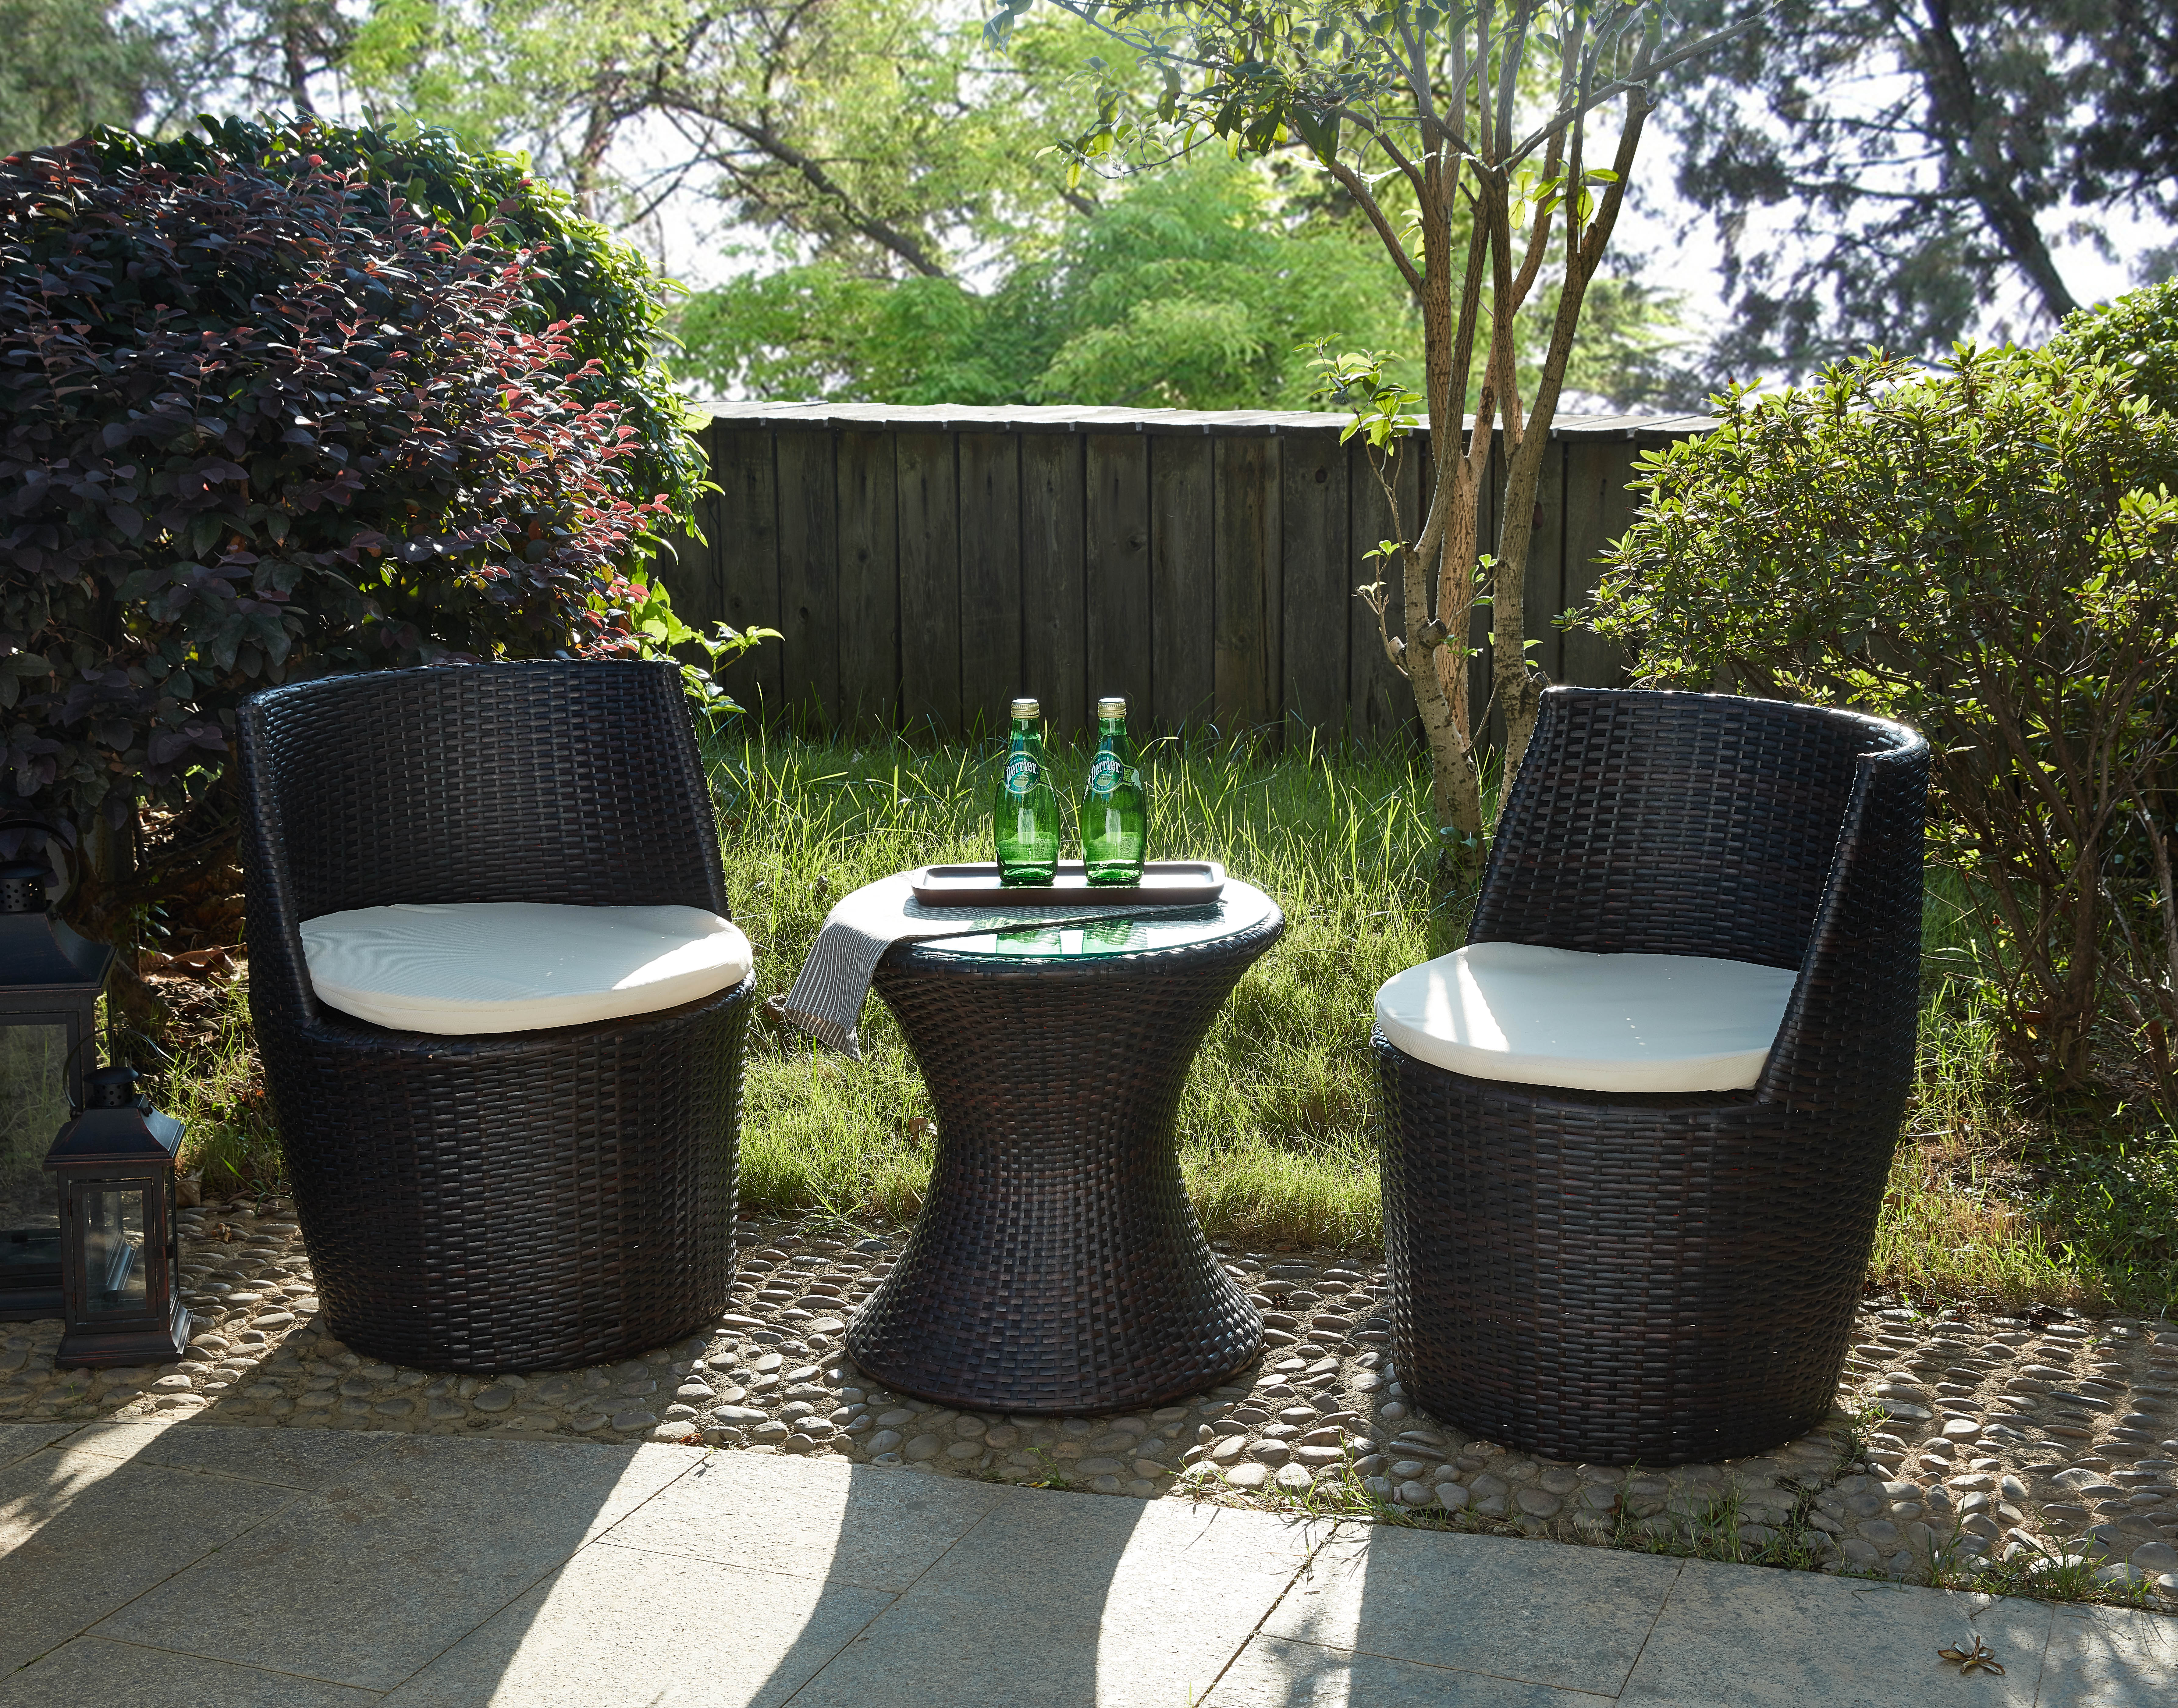 Details About Verona 3 Pc Rattan Garden Patio Furniture Vase Set Table 2 Chairs Stackable pertaining to dimensions 7147 X 5605